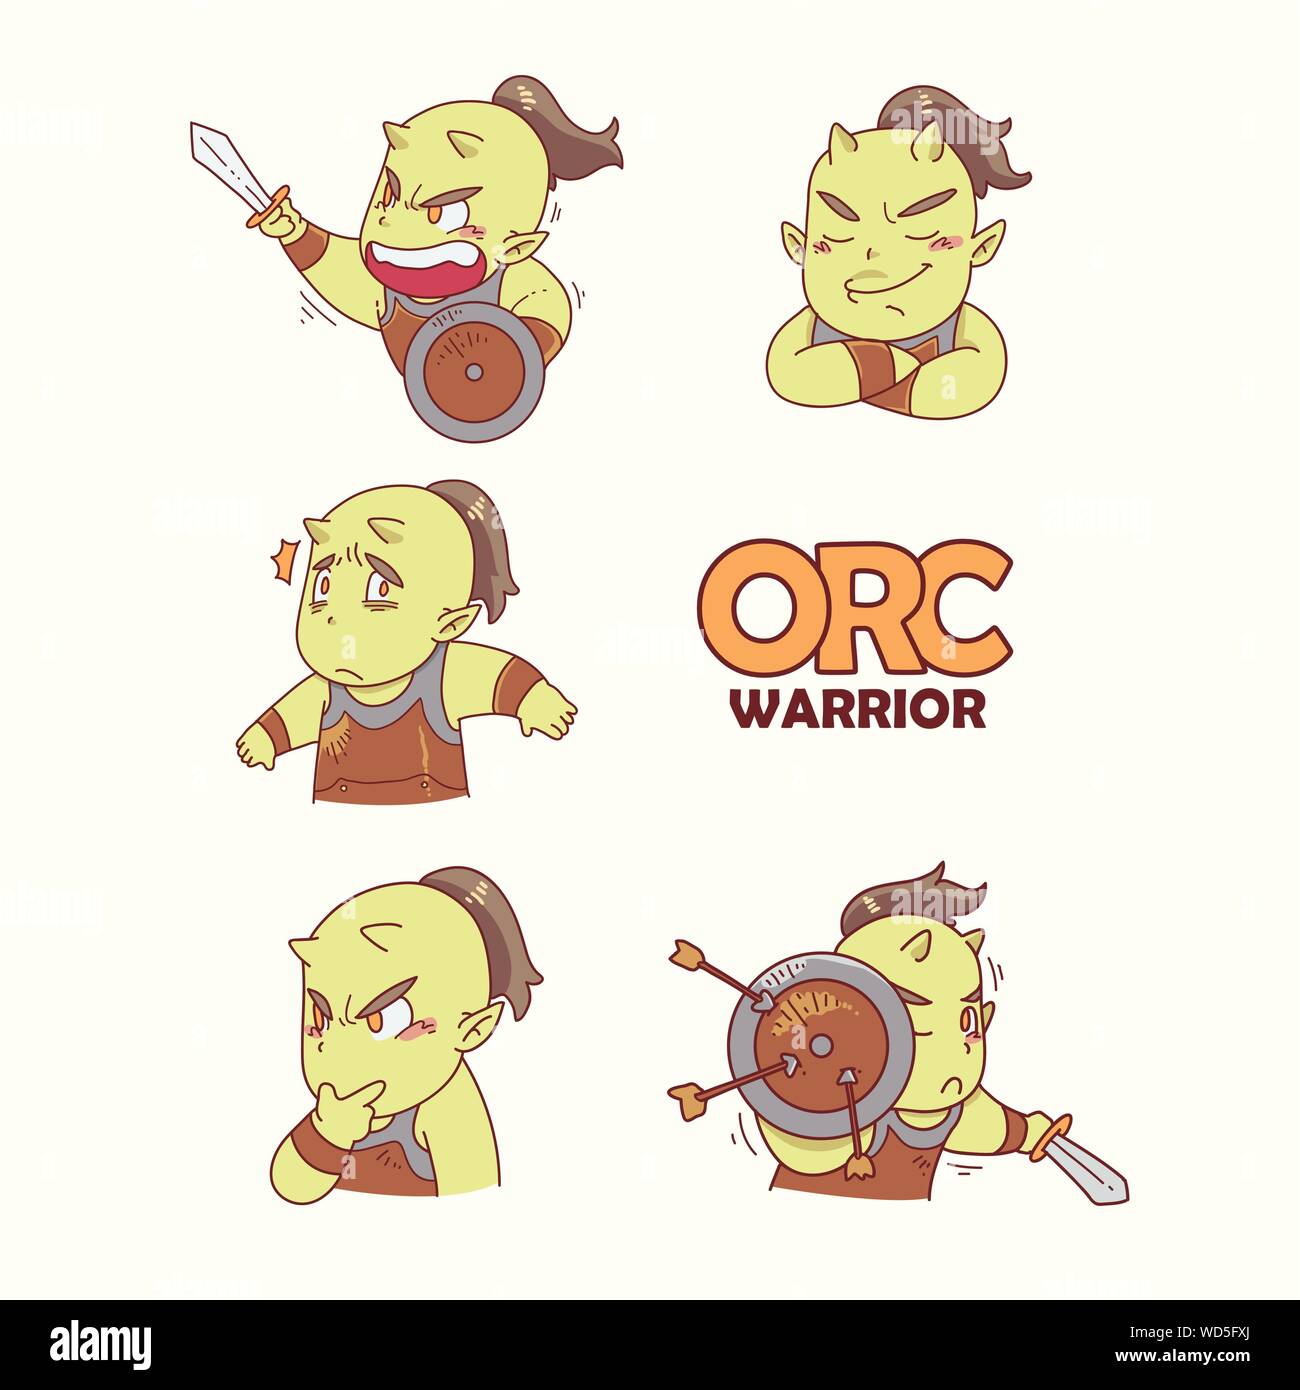 Orc warrior stickers Stock Vector